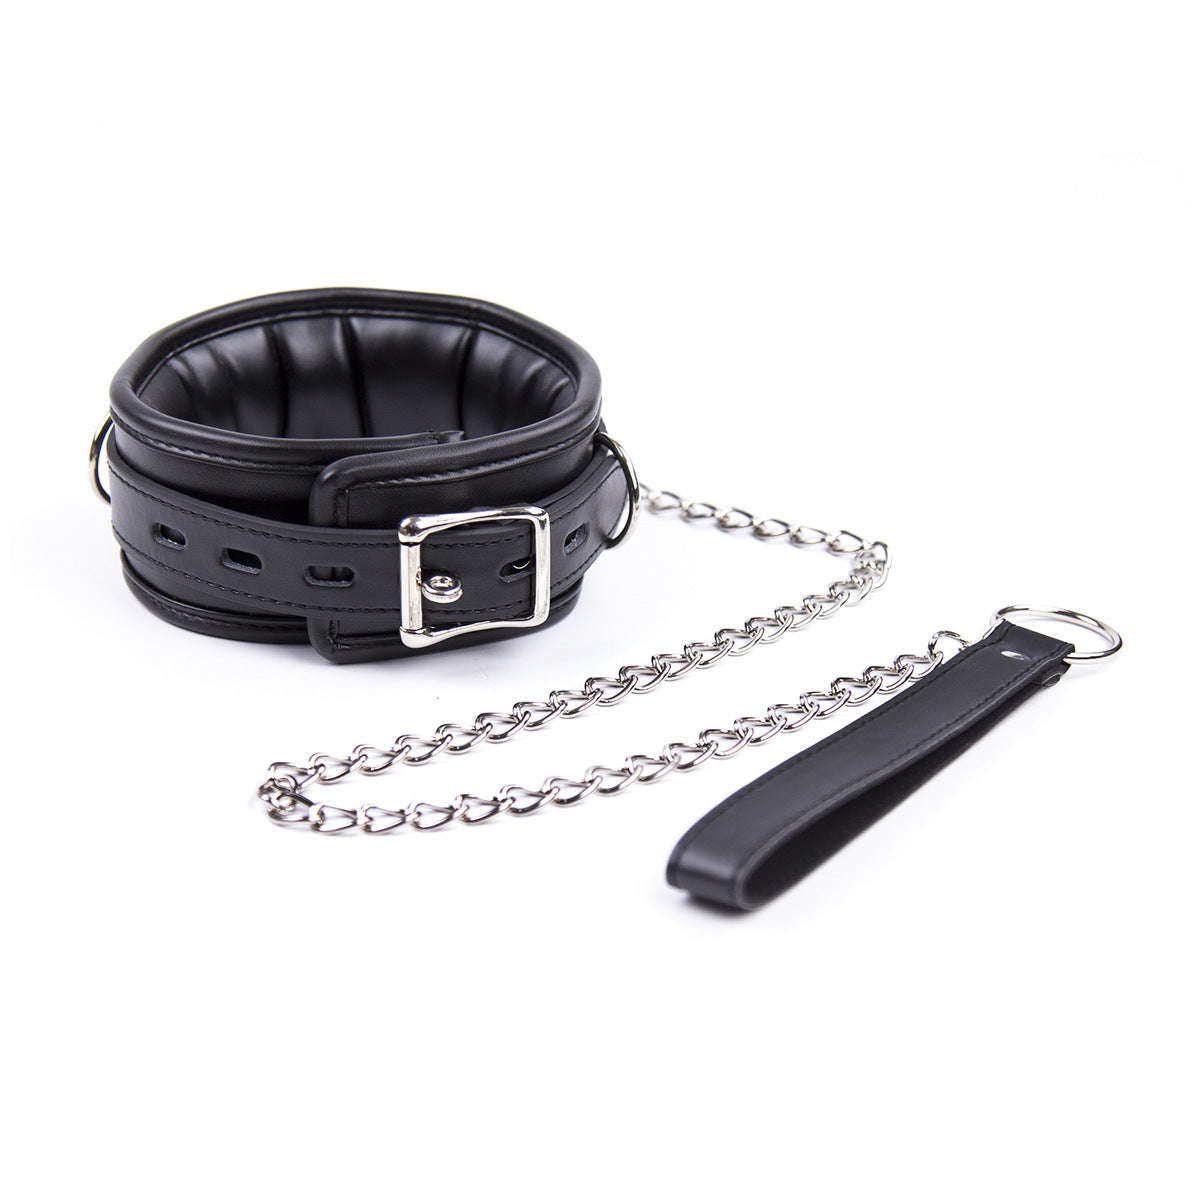 Wrapped Neck Bondage Collar And Lead Submissive